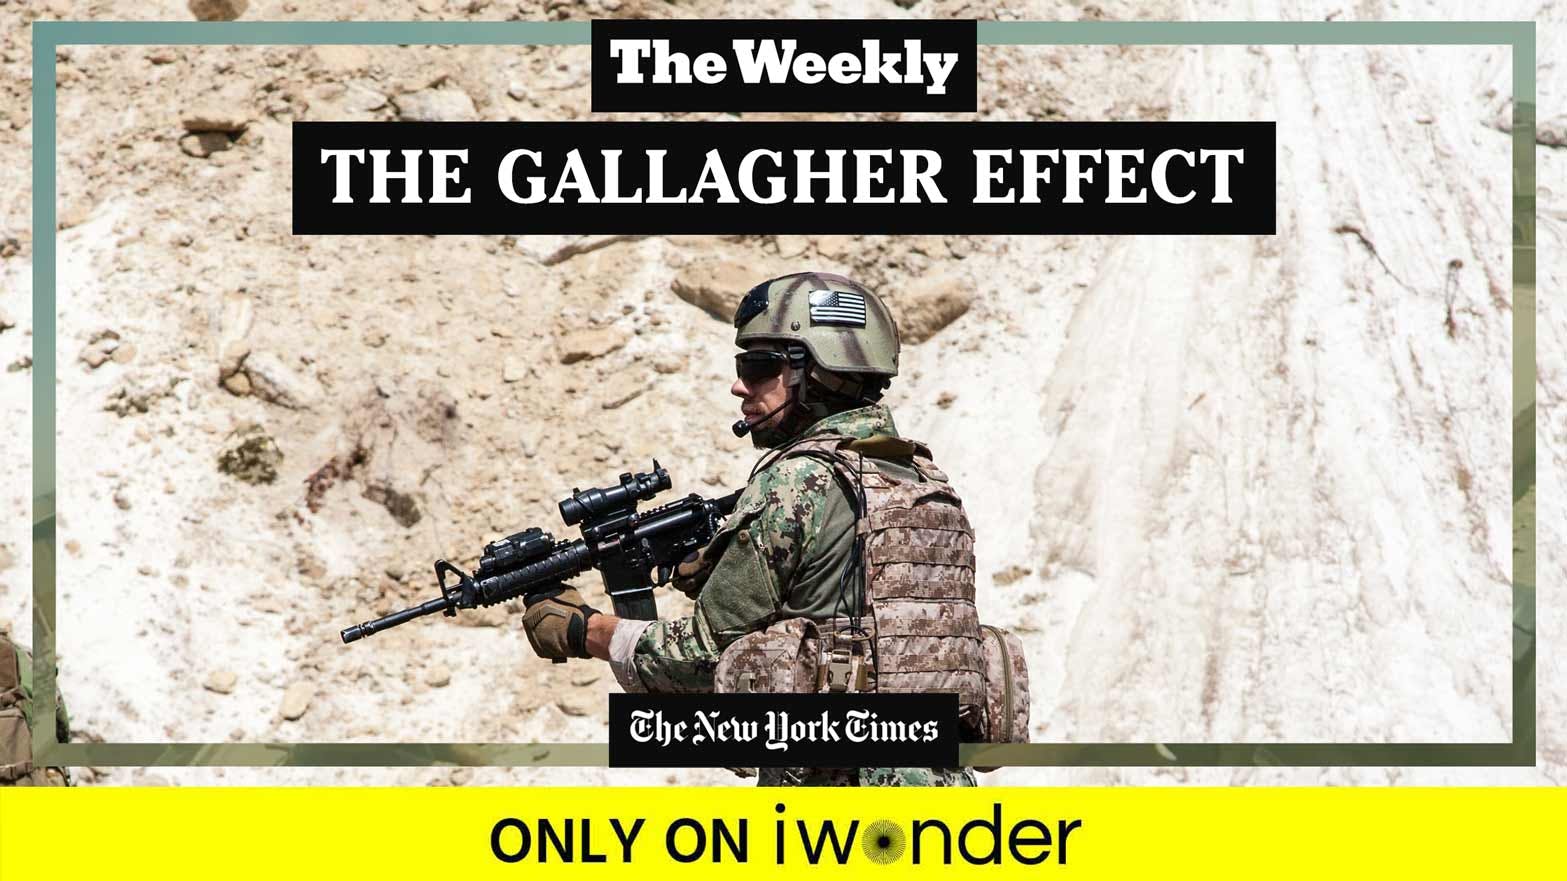 The Weekly: The Gallagher Effect